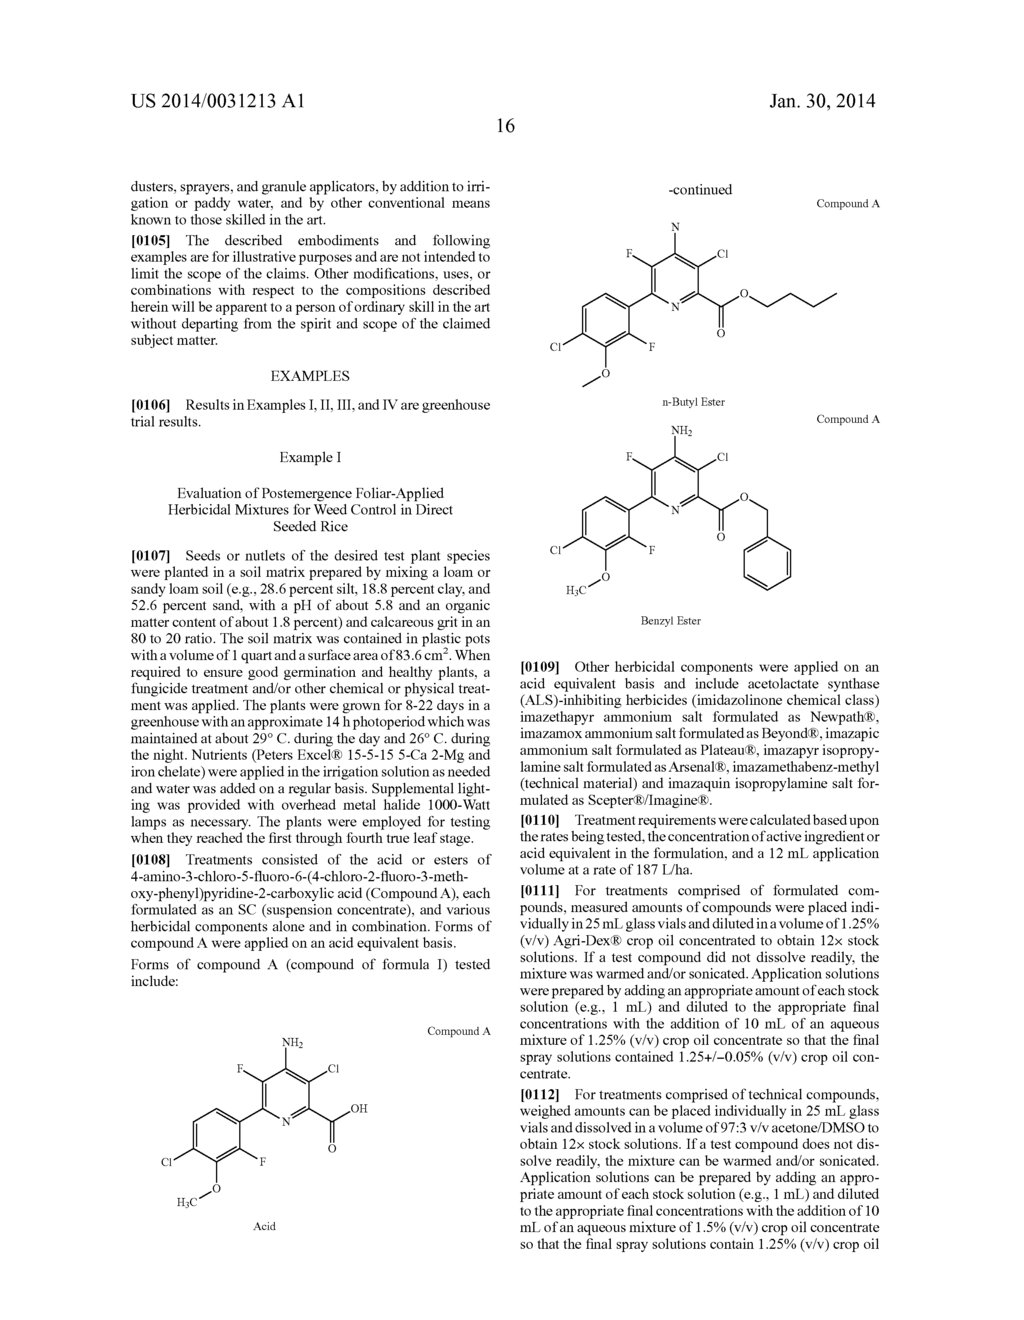 HERBICIDAL COMPOSITIONS COMPRISING     4-AMINO-3-CHLORO-5-FLUORO-6-(4-CHLORO-2-FLUORO-3-METHOXYPHENYL)     PYRIDINE-2-CARBOXYLIC ACID OR A DERIVATIVE THEREOF AND IMIDAZOLINONES - diagram, schematic, and image 17